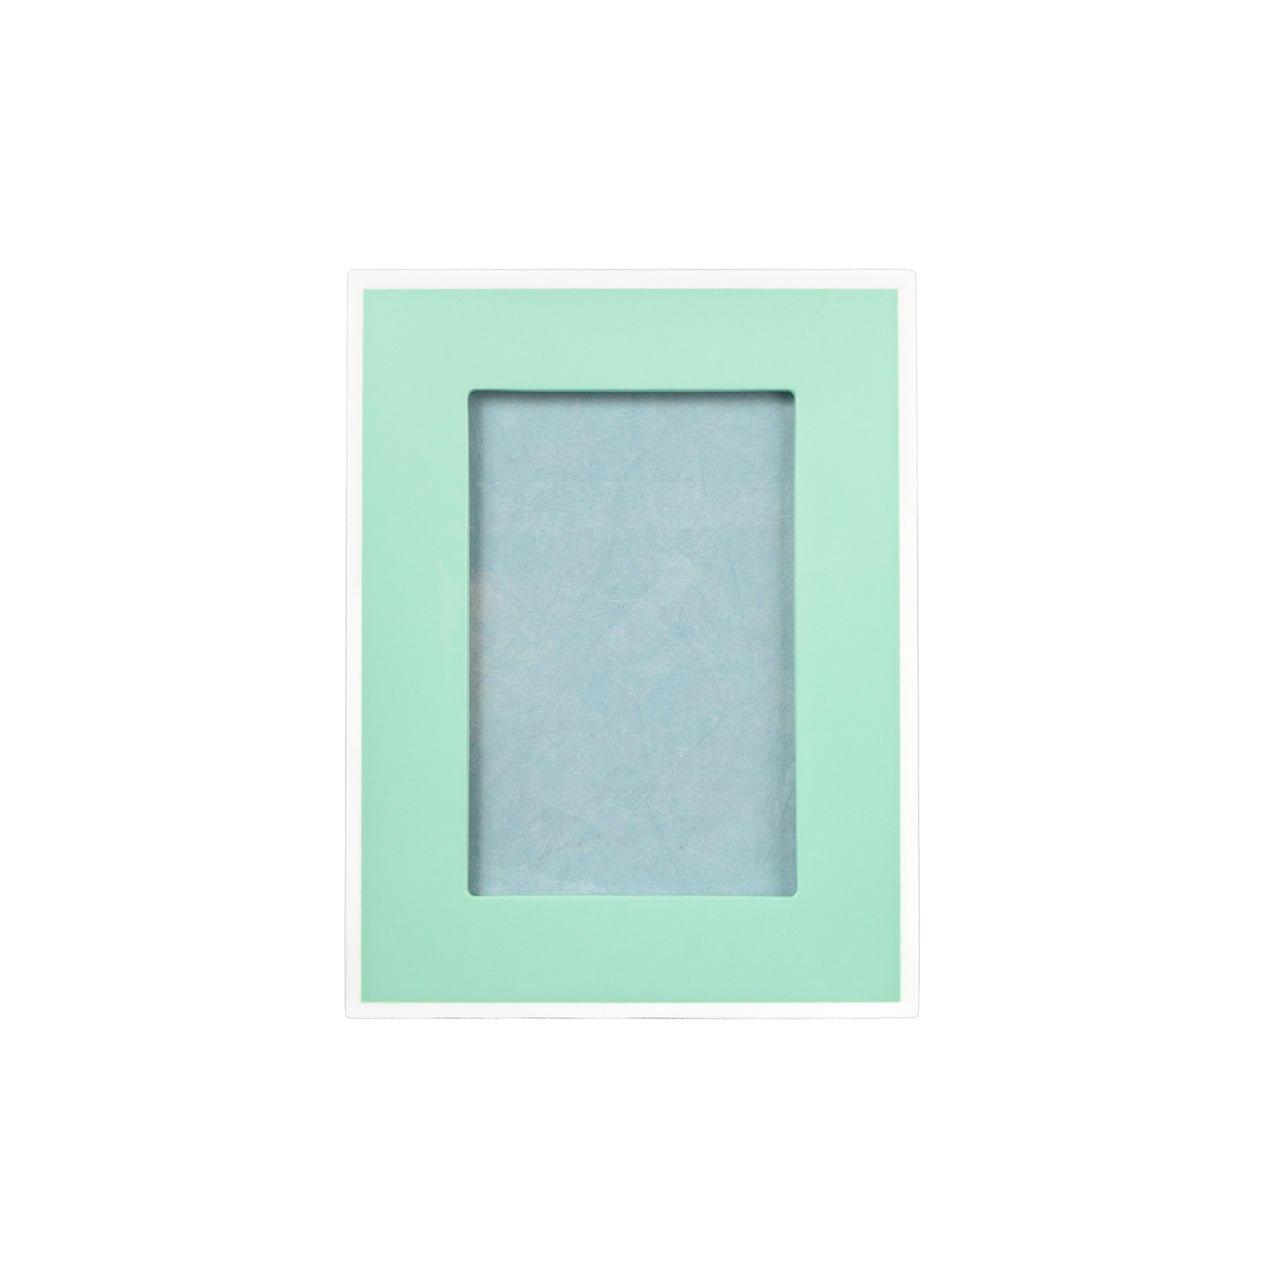 Brouk & Co Picture Frames Laurel Picture Frame 4x6 (Mint Green)